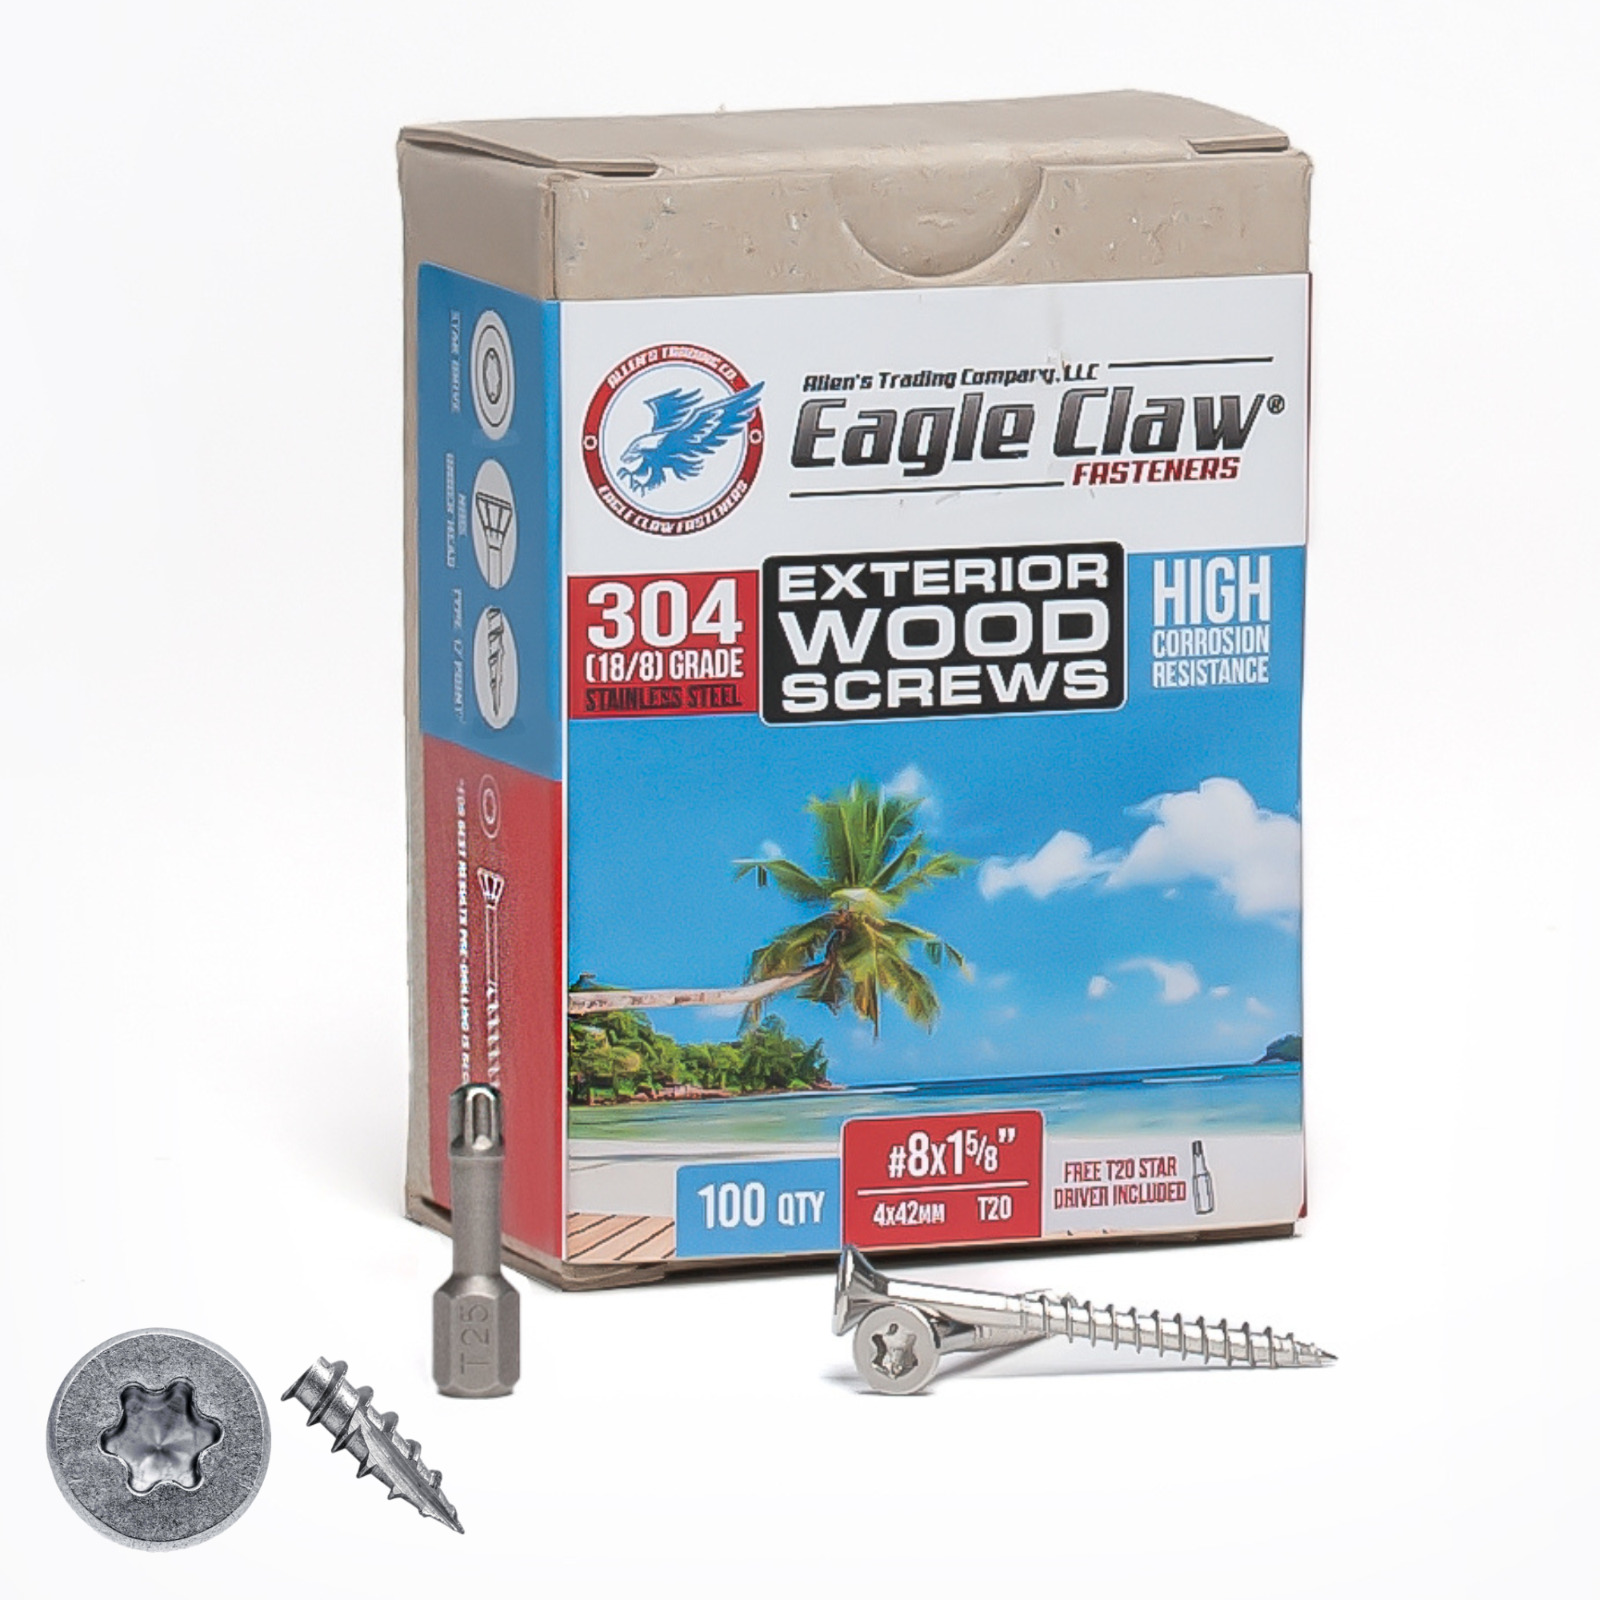 Eagle Claw Stainless Steel Wood Screws Star Drive Flat Head Various Sizes